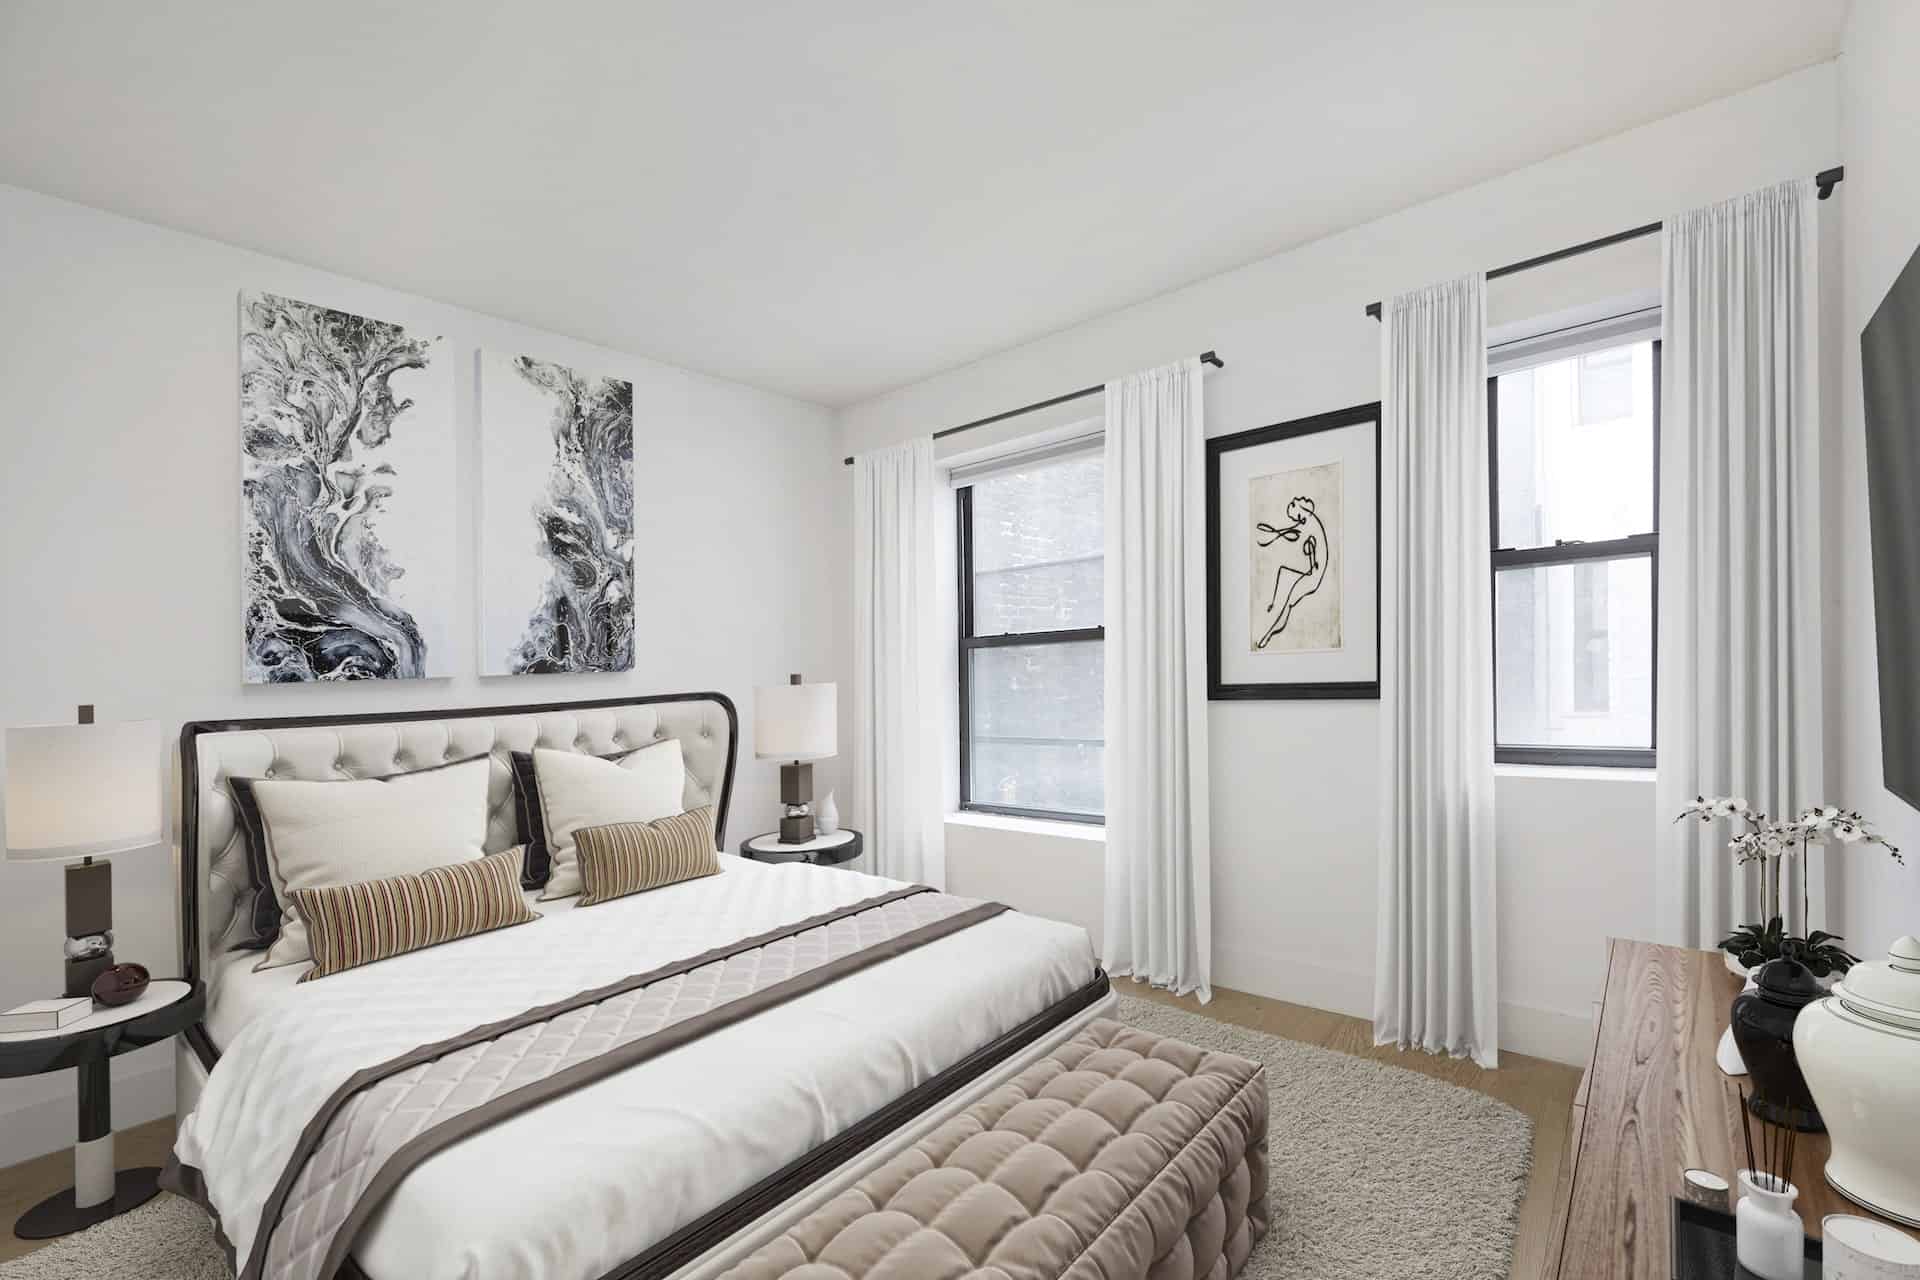 Bedroom at 401 East 50th Street apartments in Midtown East with a king bed, side tables, hardwood floors, and two windows.